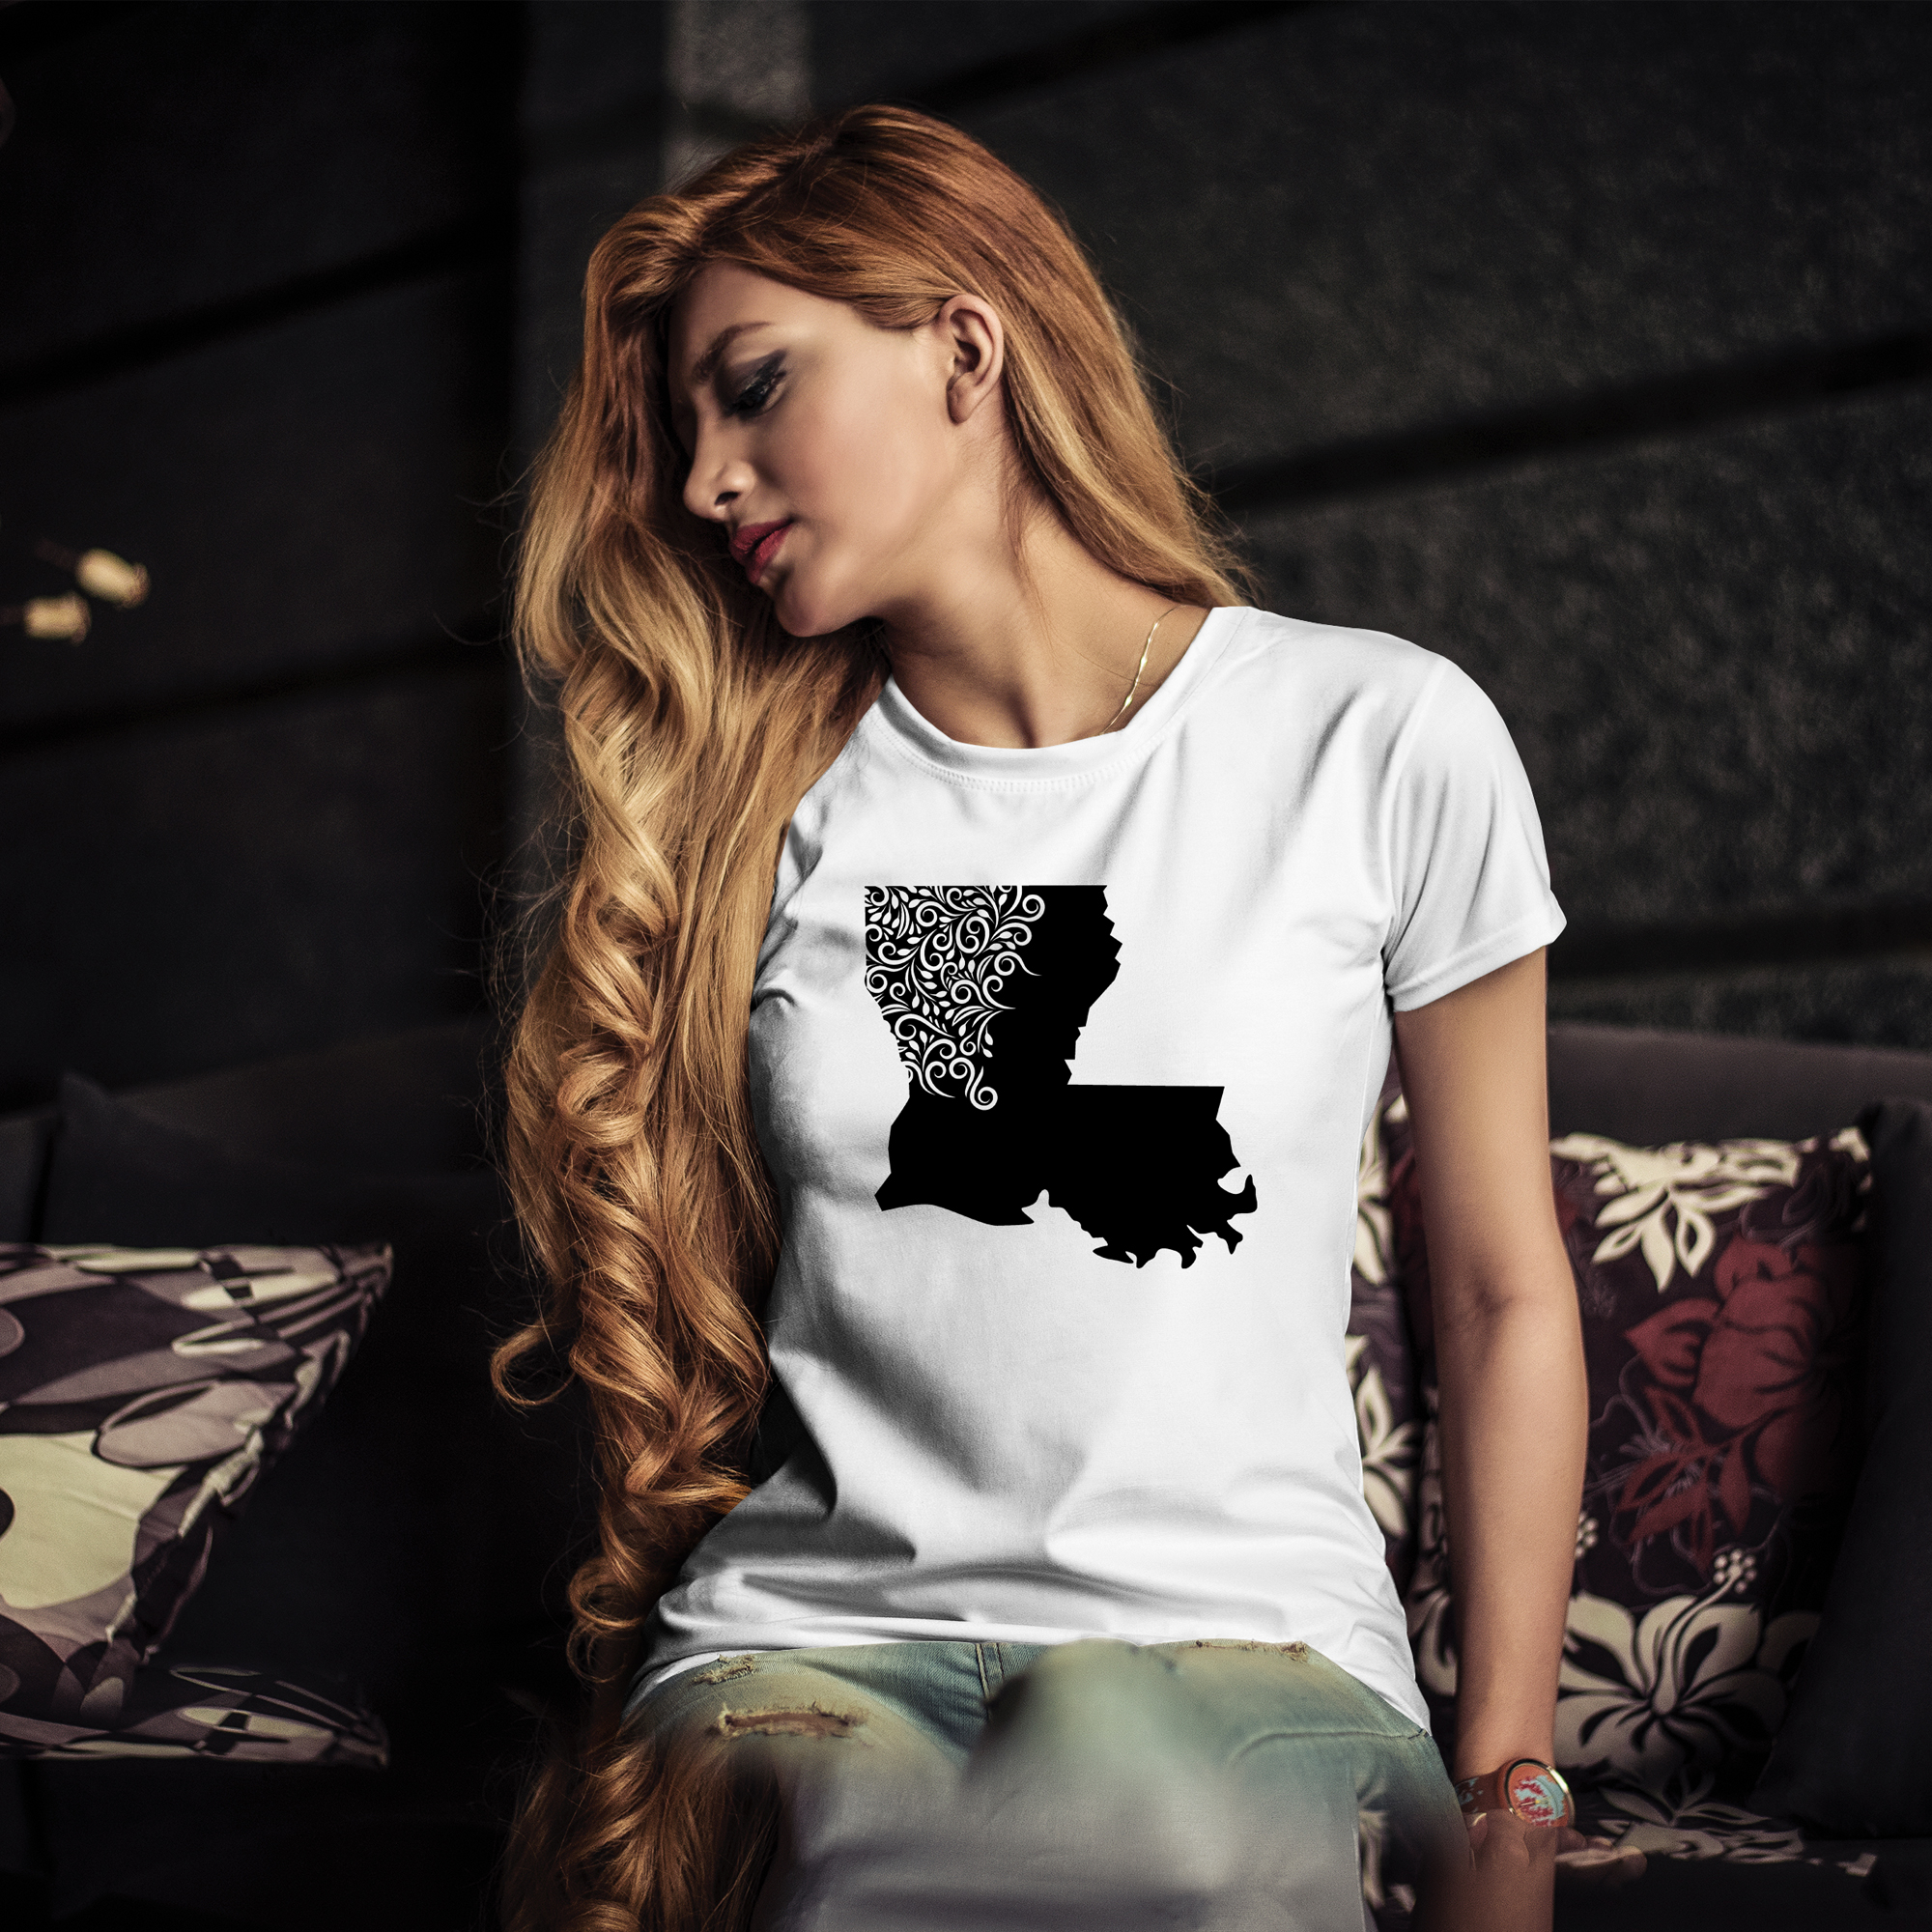 White t-shirt with black illustration of Louisiana state.